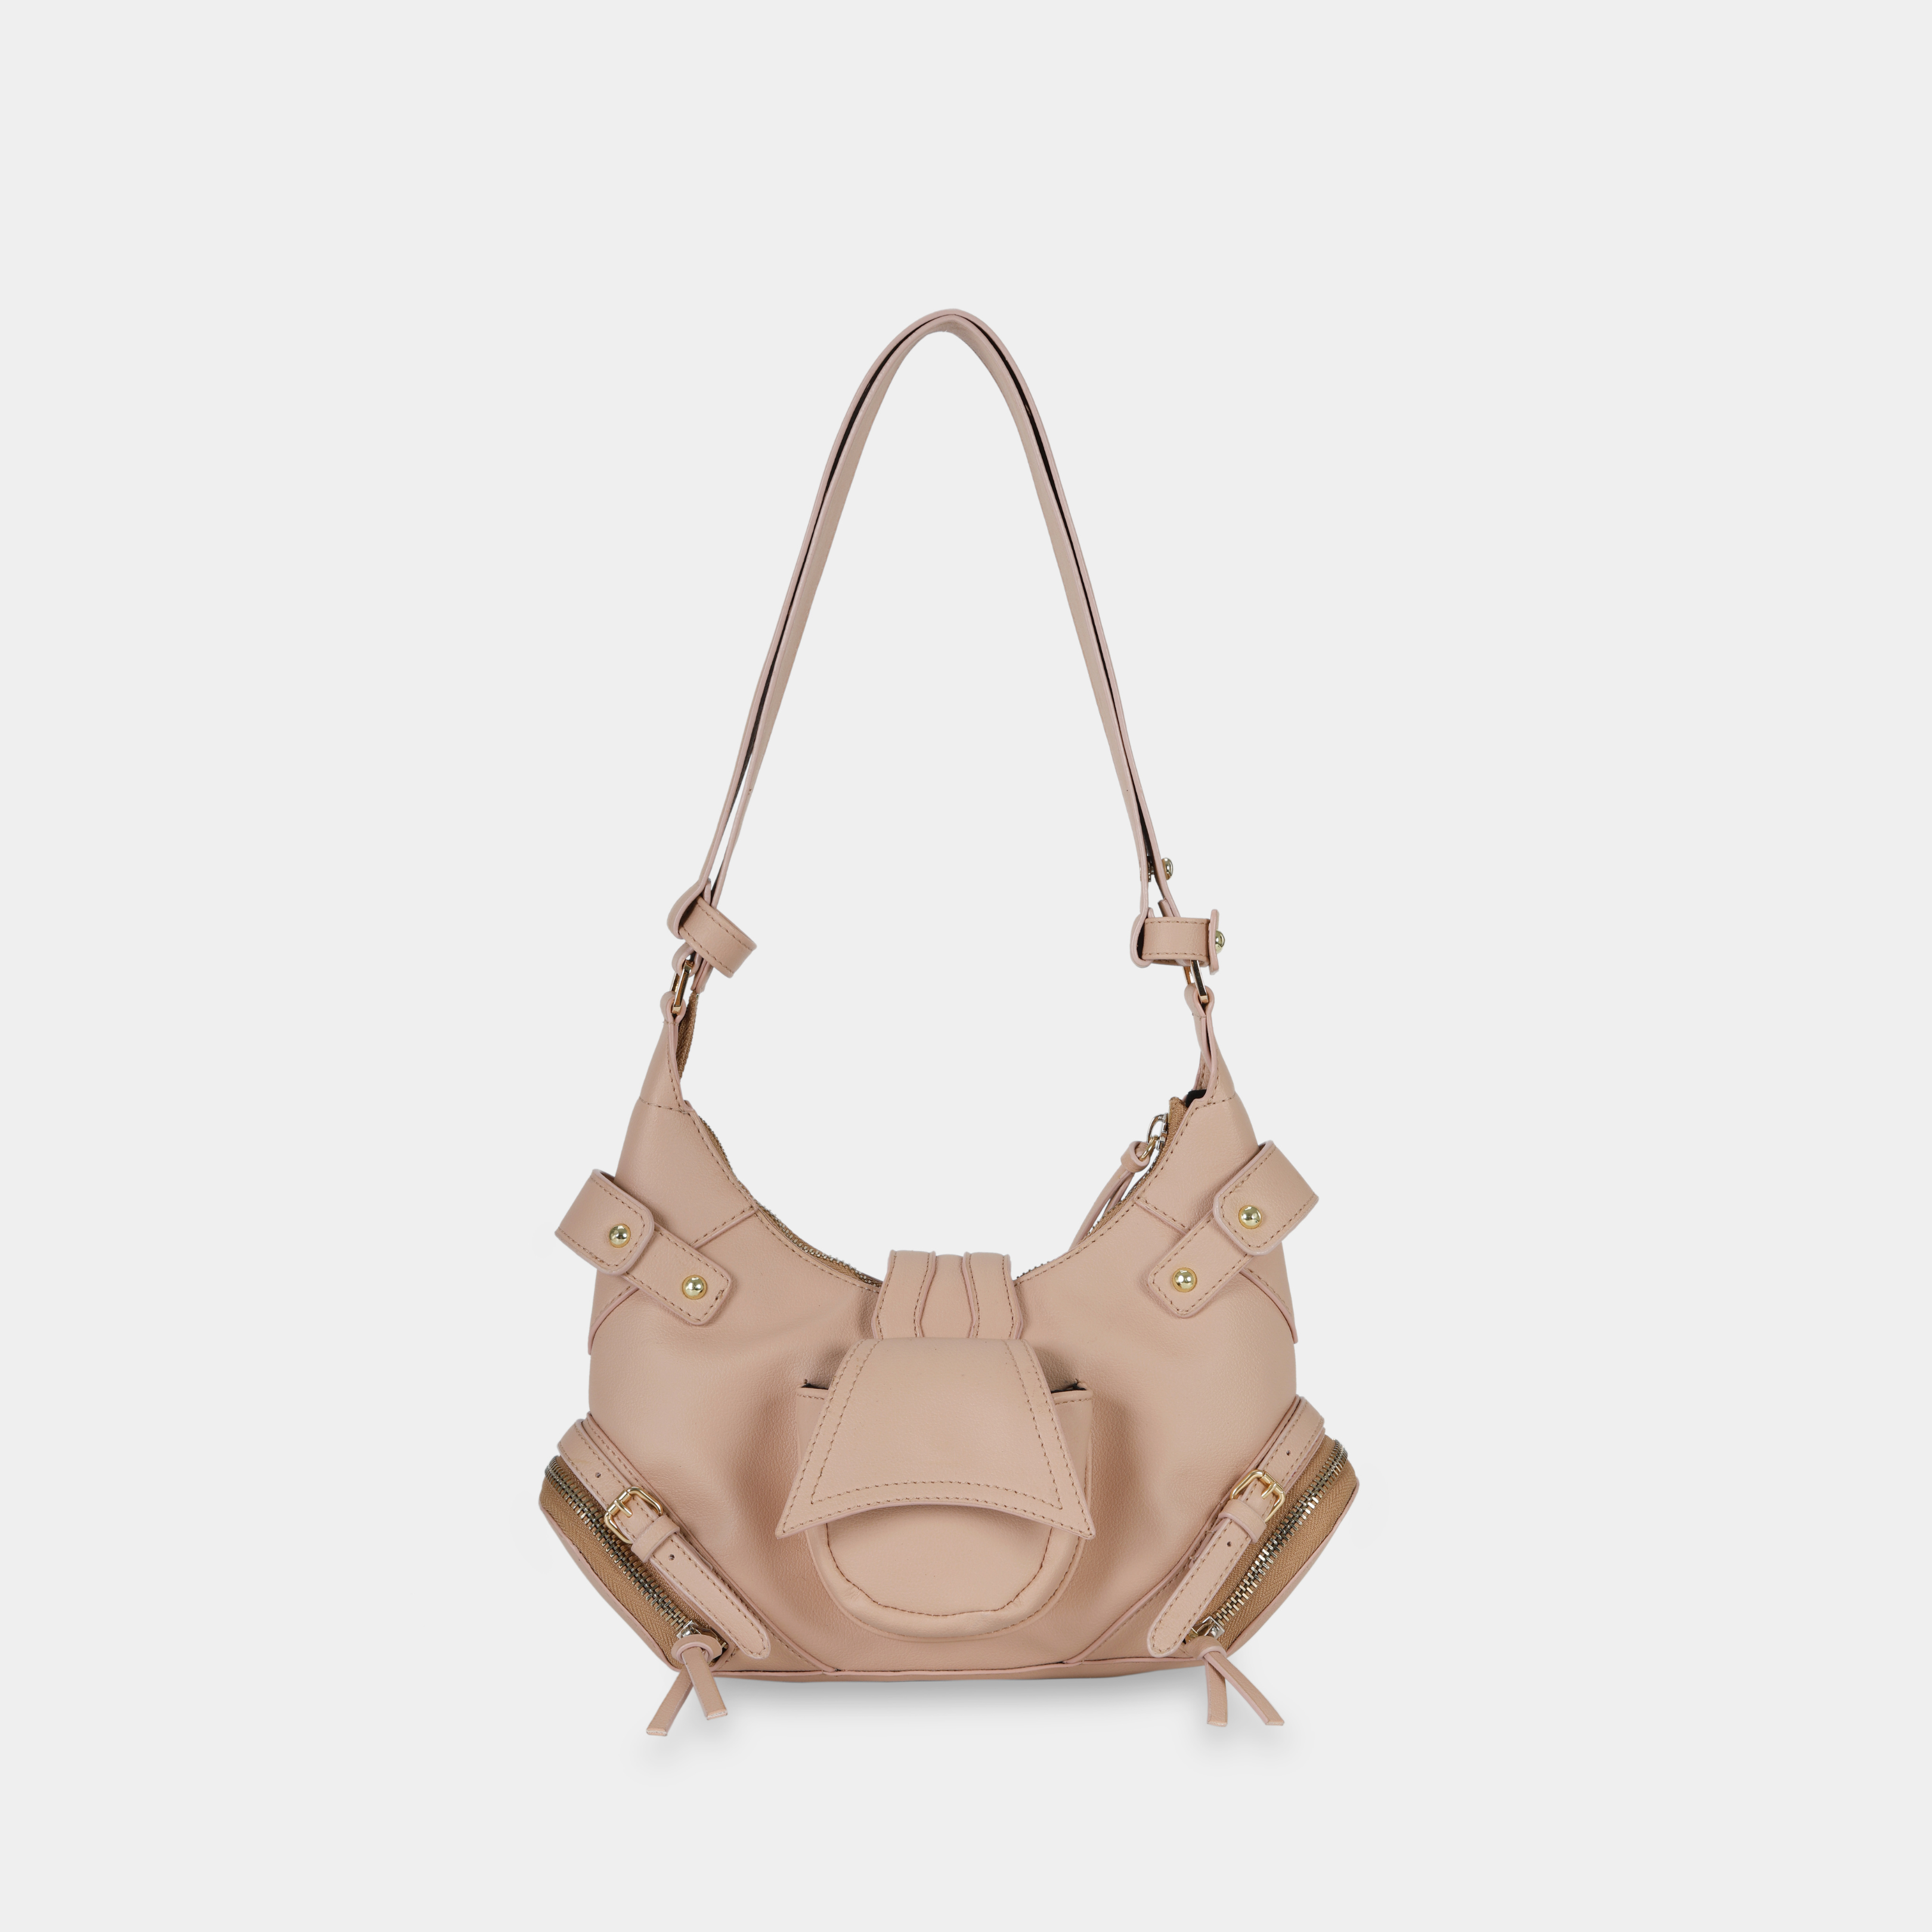 Handbag 2-FACE size S in Baby Pink